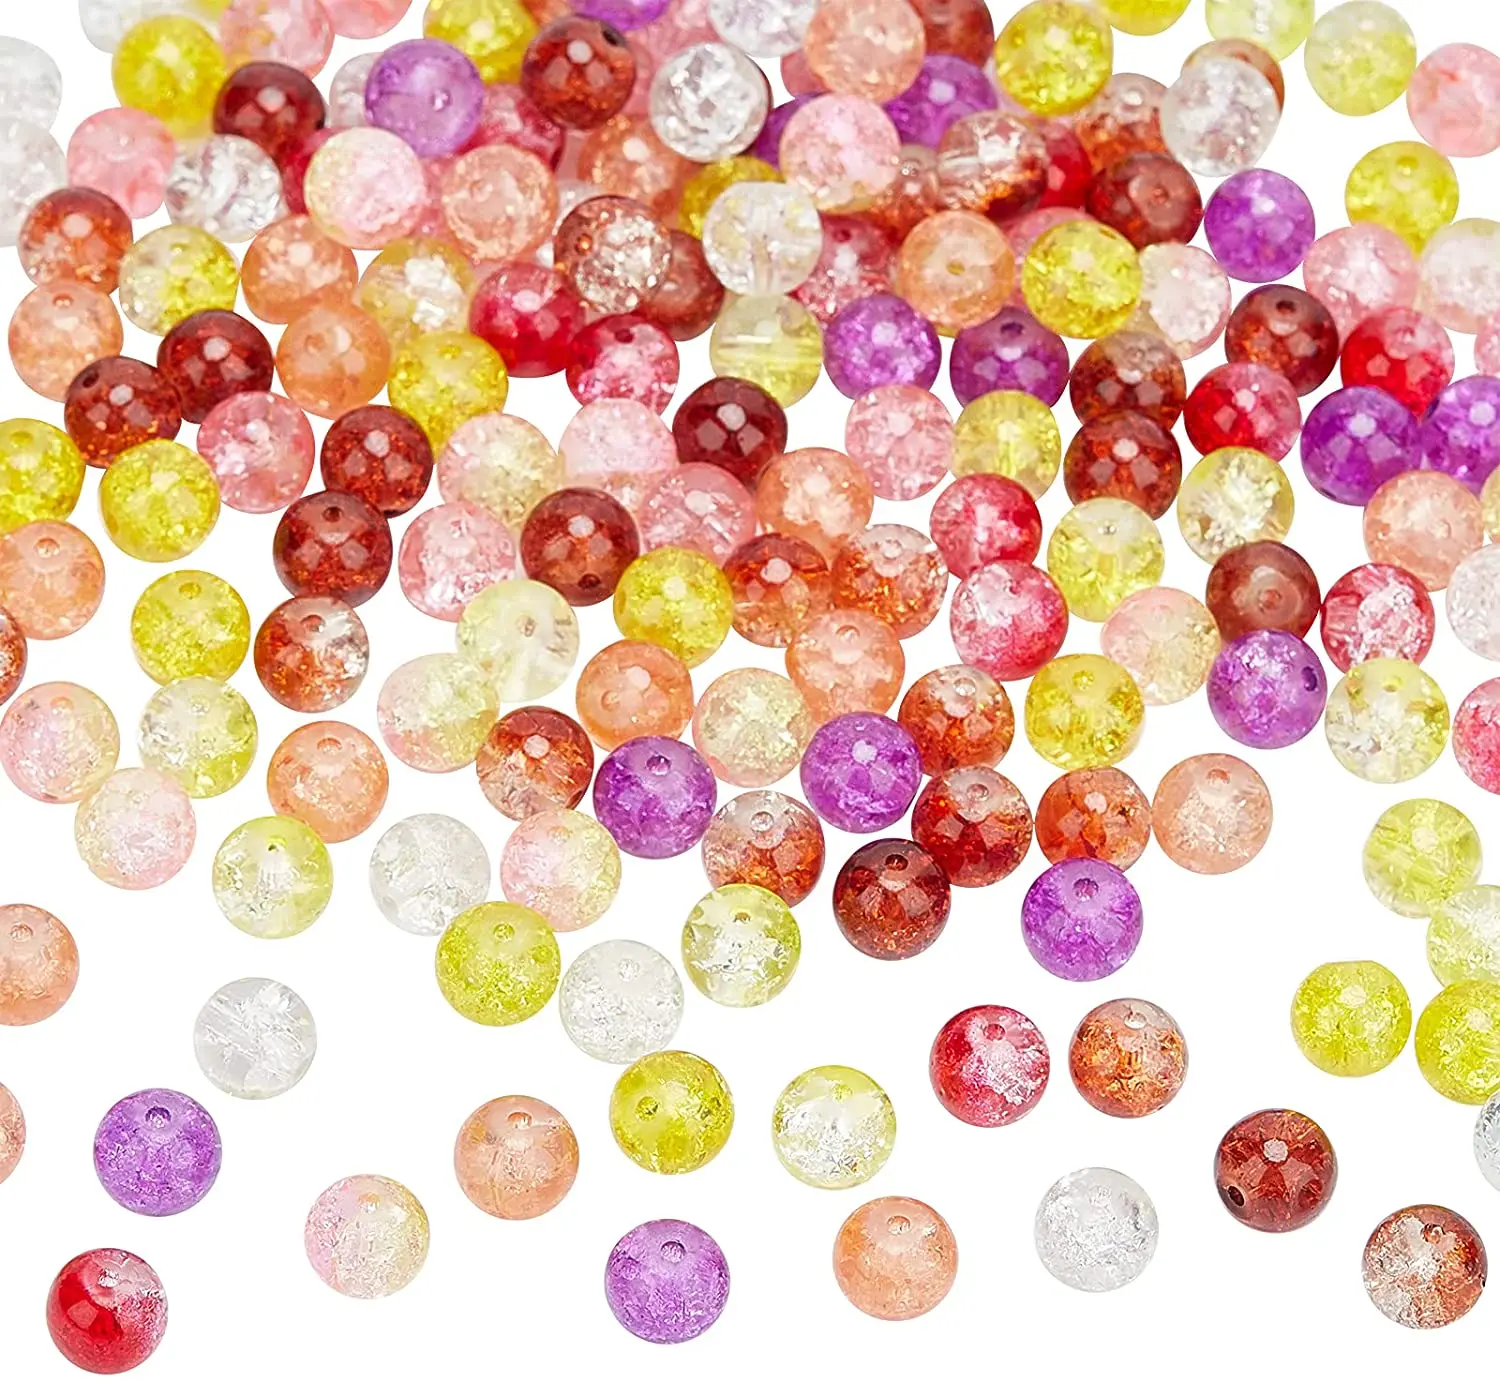 

200 PCS 10 Color Crackle Lampwork Glass Beads 8mm Handcrafted Round Crystal Loose Beads for Necklace Bracelet